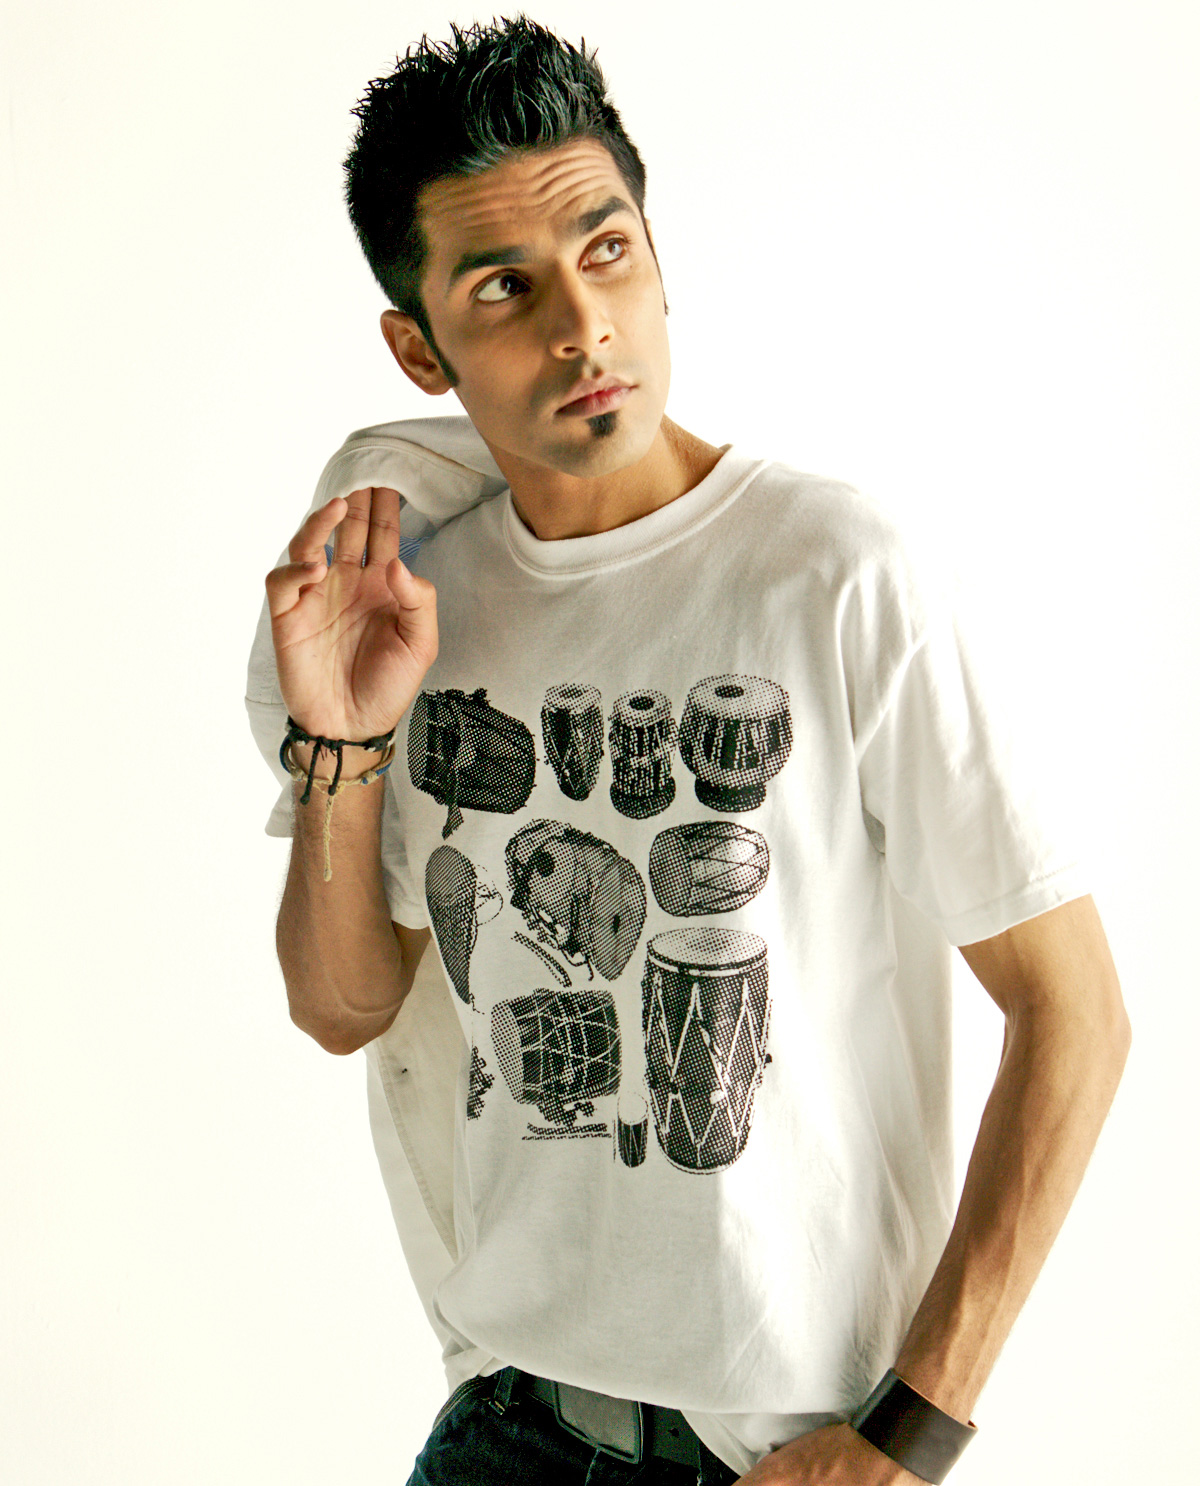 South Asian Male Model wearing white Dhol halftone vintage T.shirt on Black shirt. Graphic design t.shirts by Brown Man Clothing Co.